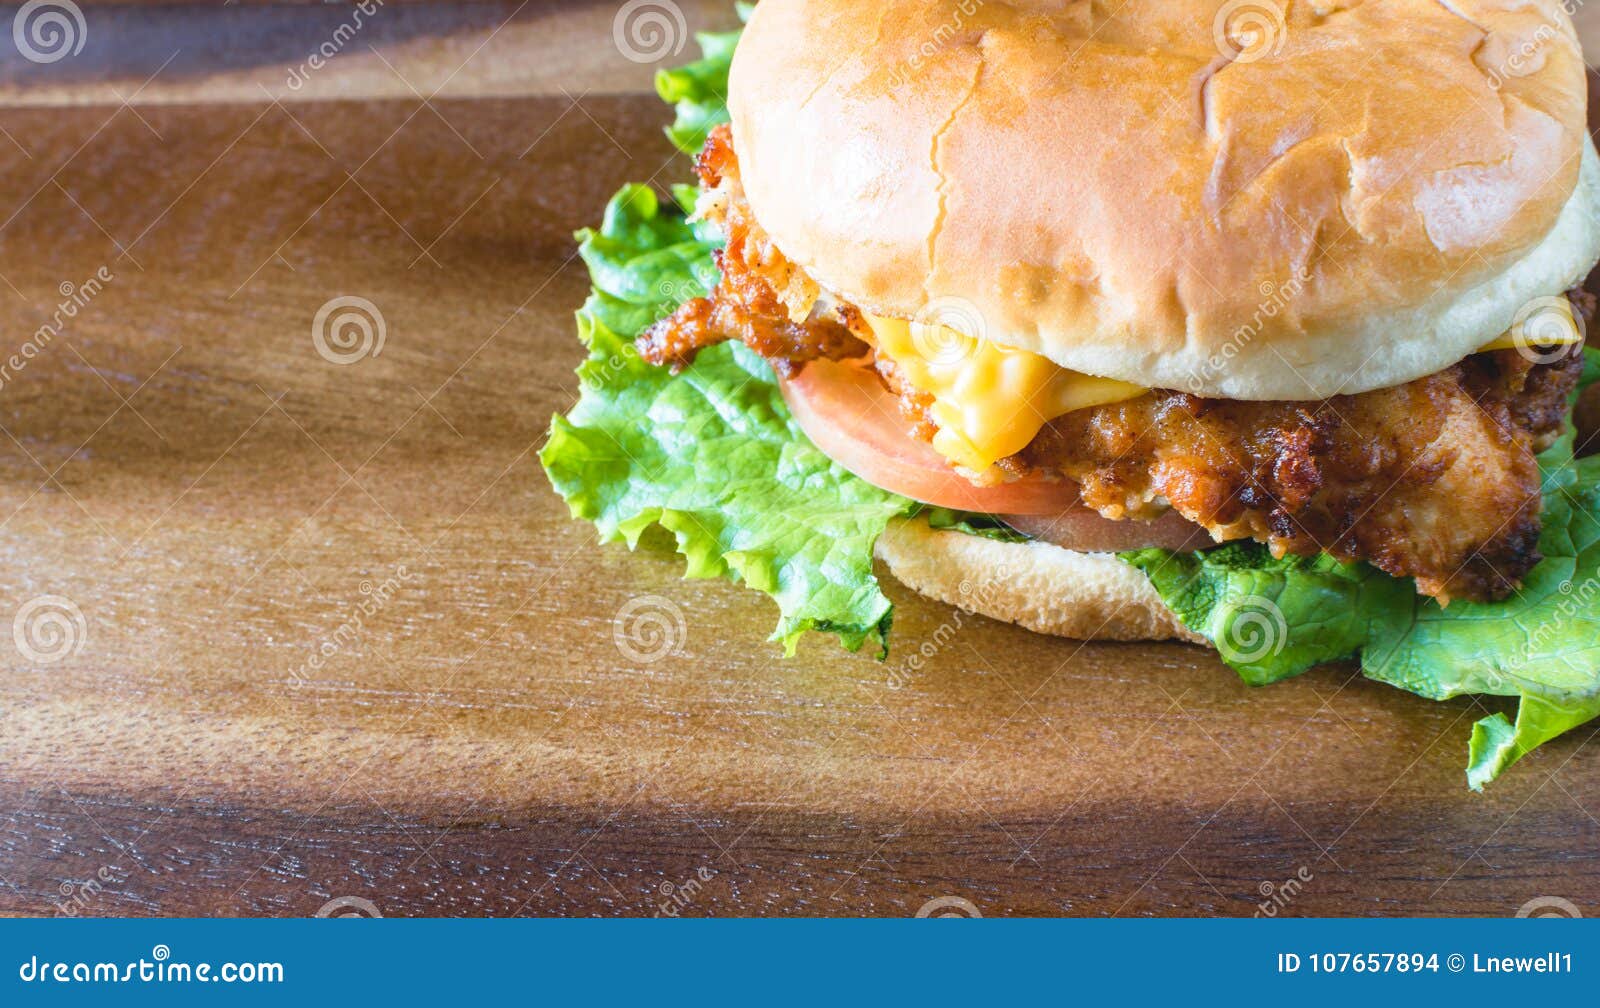 delicious chicken sandwich on wood tray